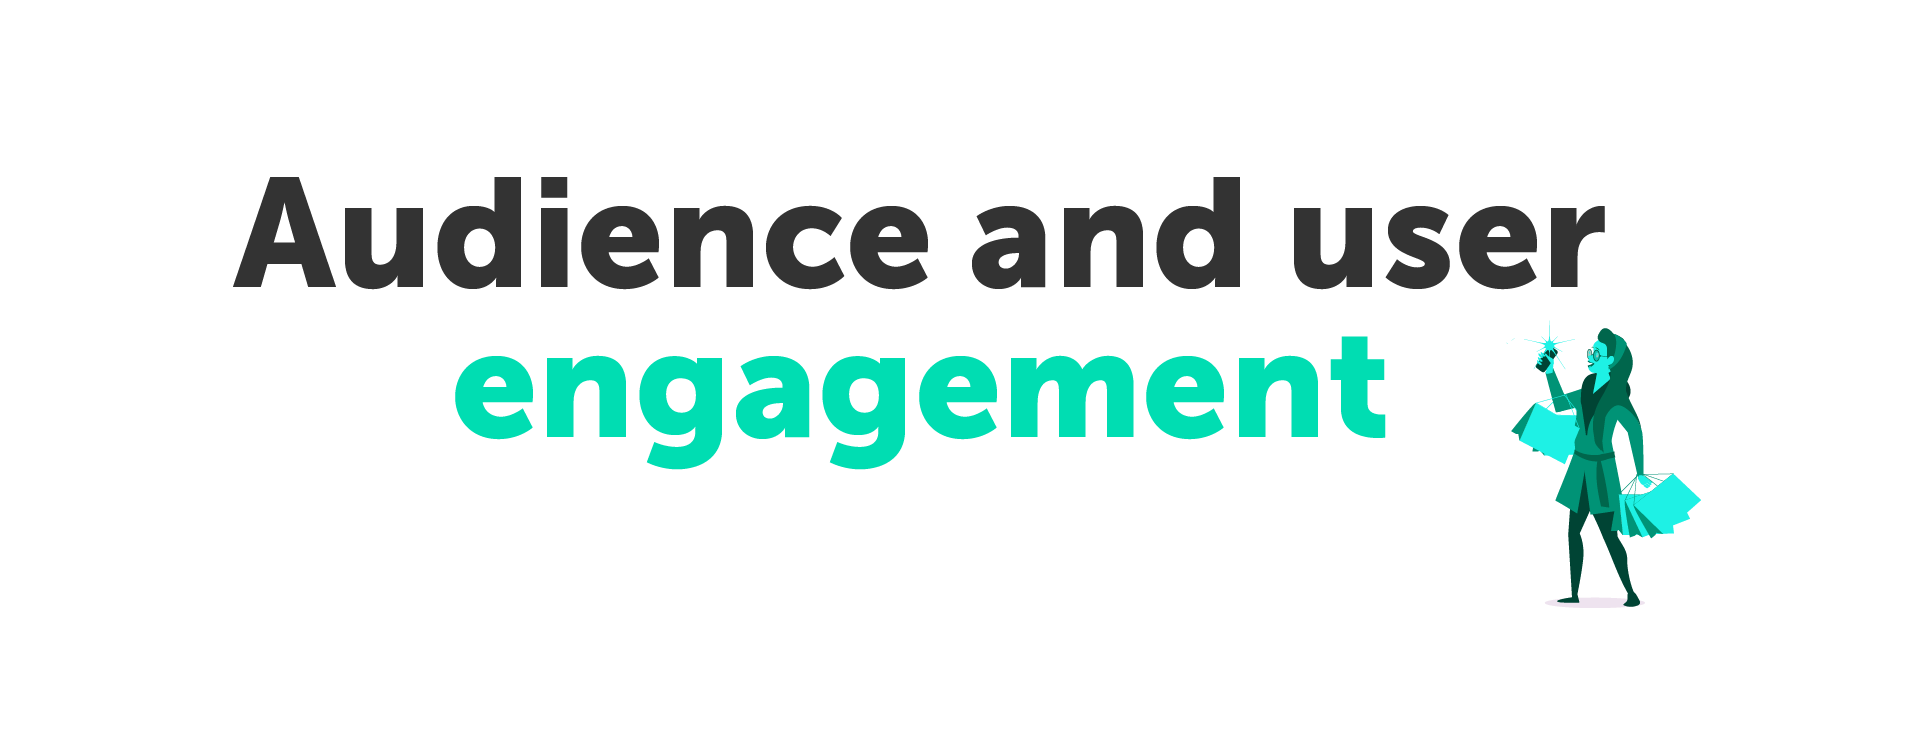 Audience and user engagement